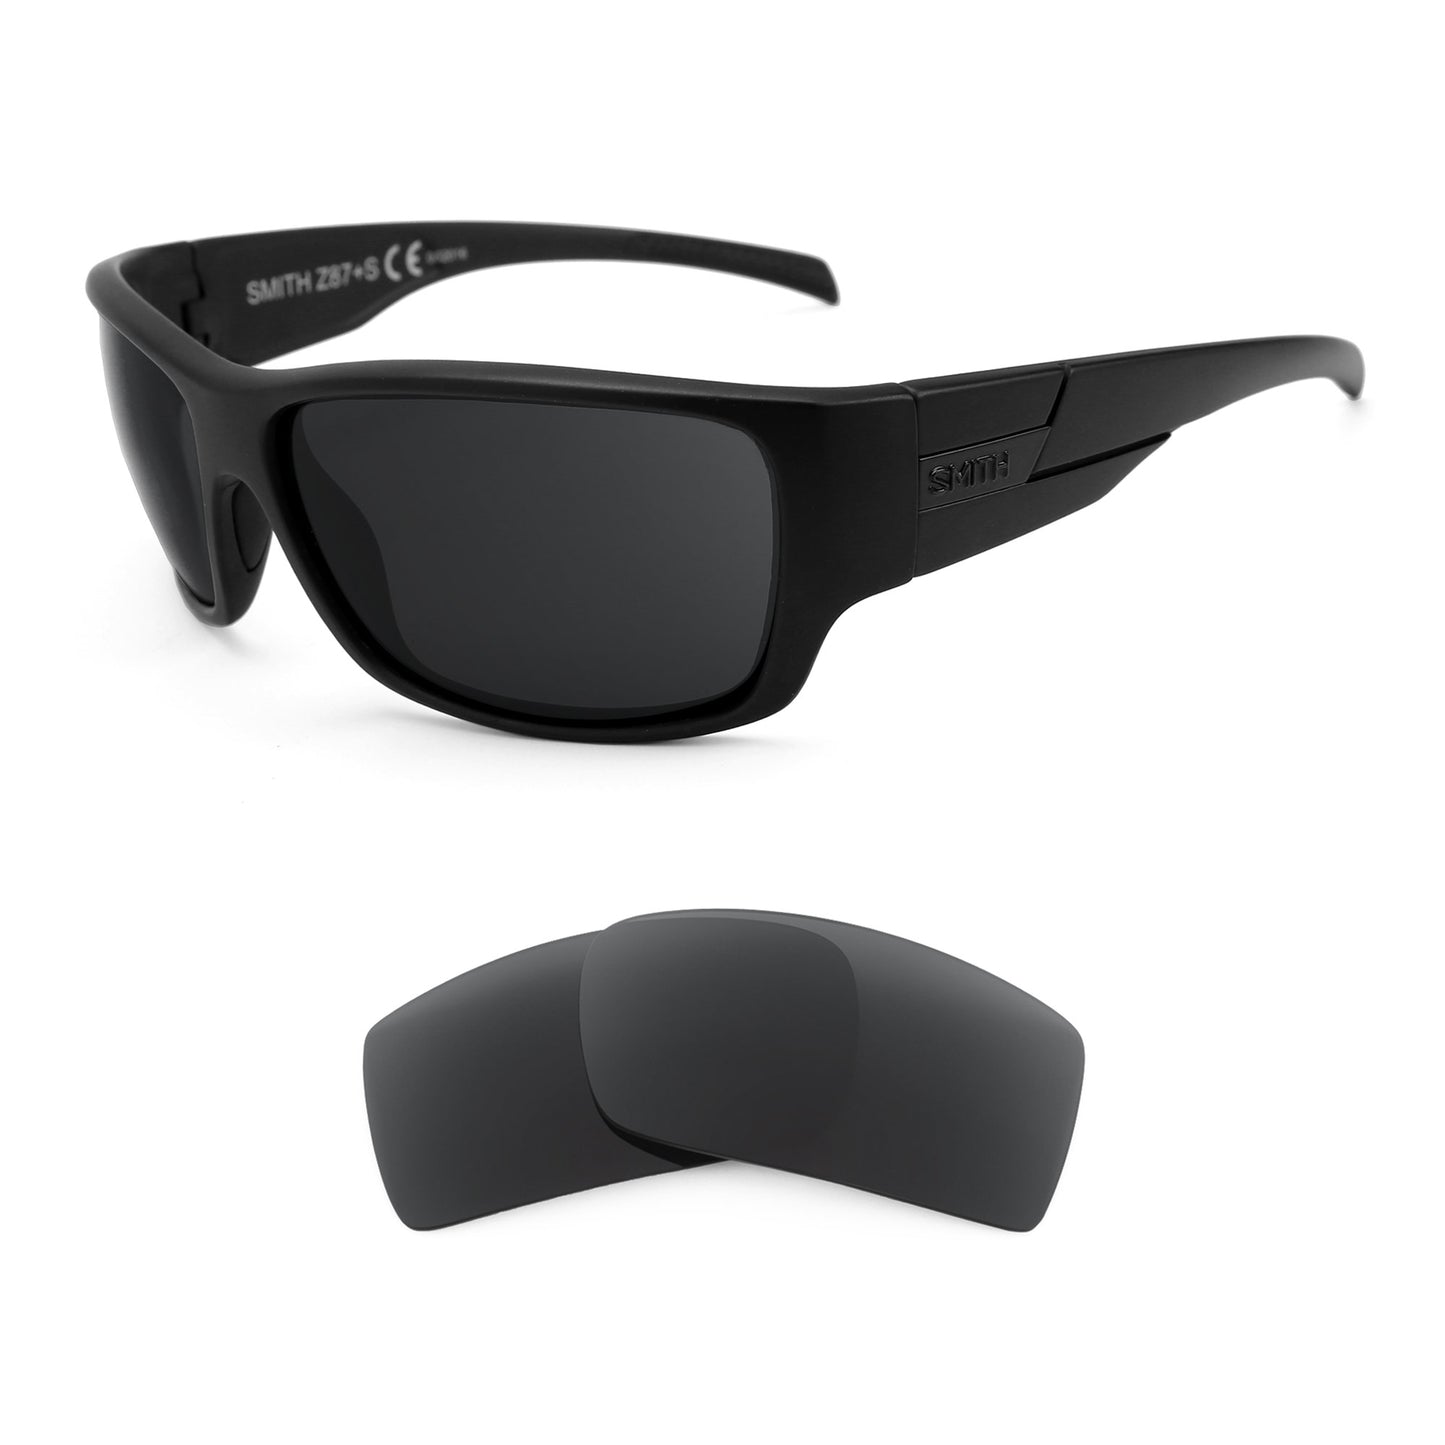 Smith Frontman Elite sunglasses with replacement lenses